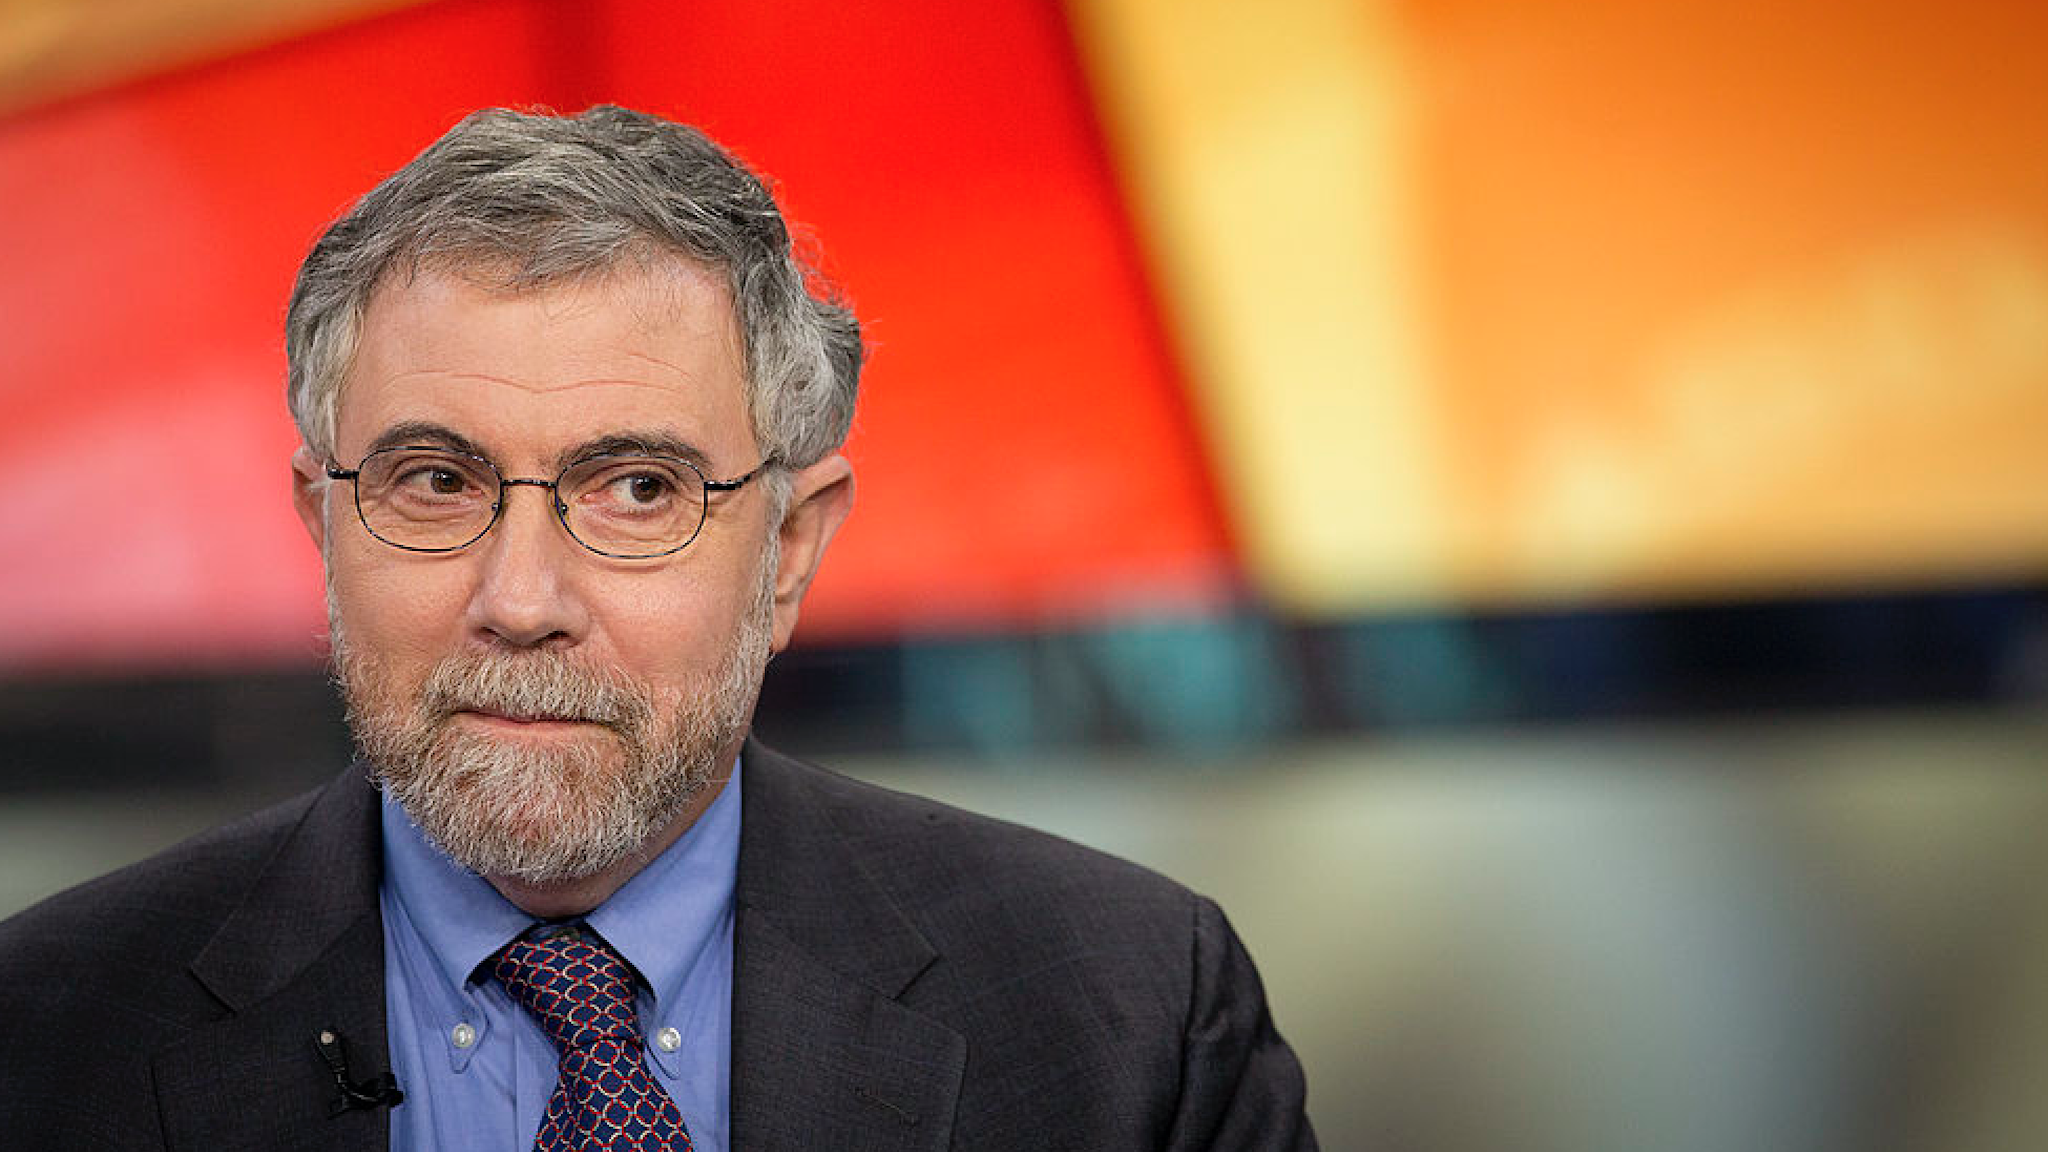 Nobel Prize-winning Economist Paul Krugman, professor of international trade and economics at Princeton University, pauses during a Bloomberg Television interview in New York, U.S., on Monday, Jan. 28, 2013.